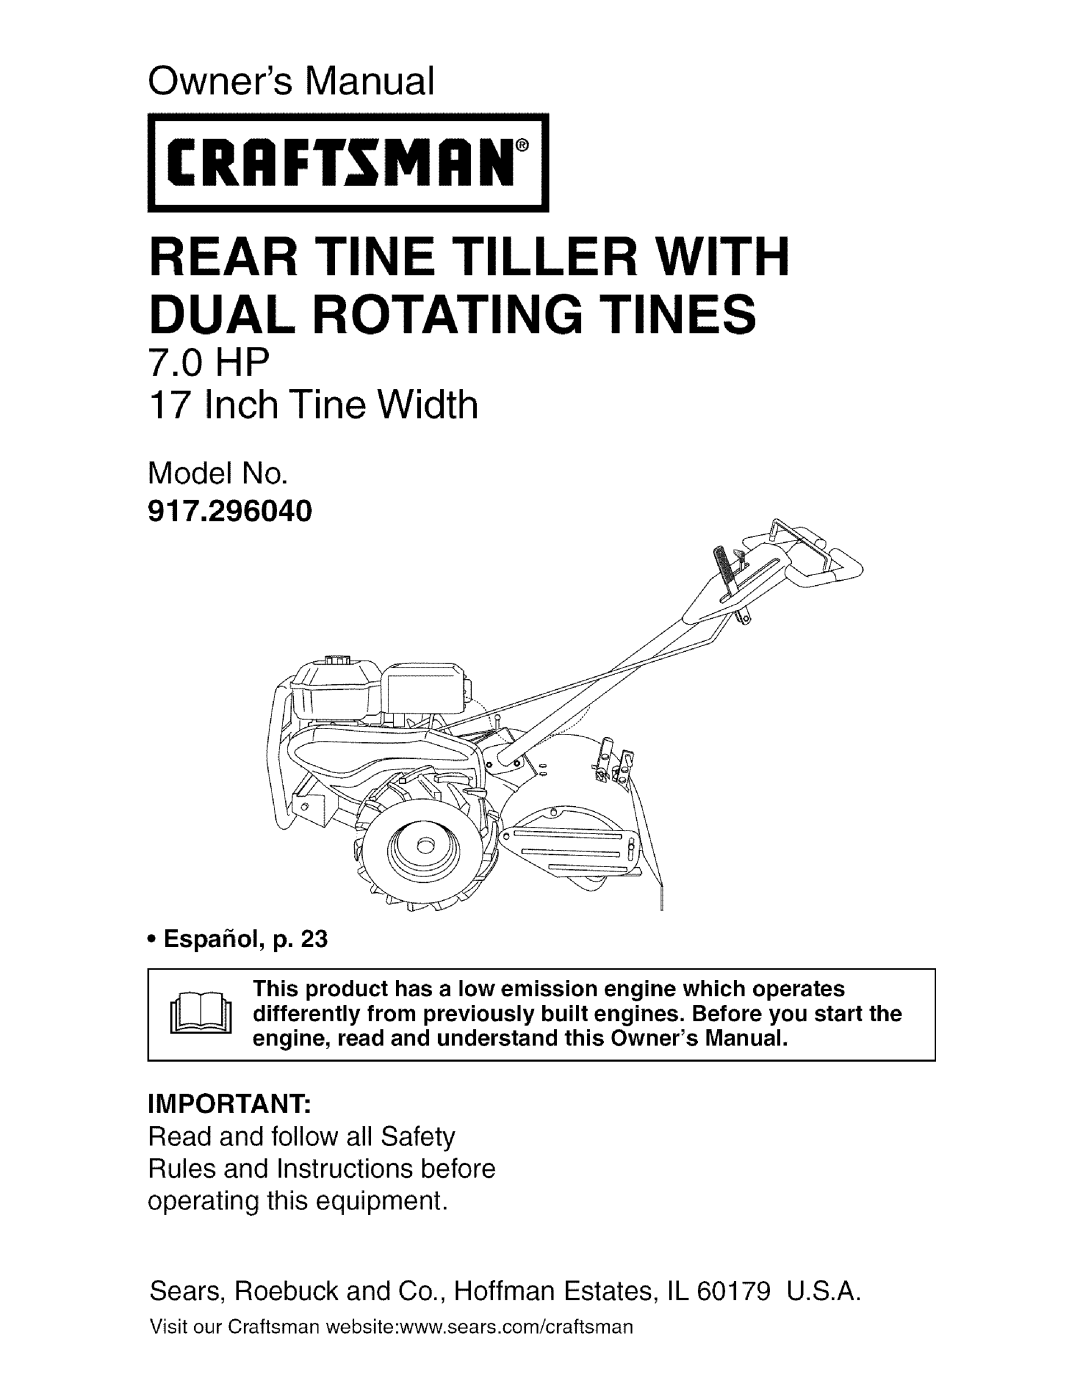 Craftsman owner manual Rear Tine Tiller With, Owners Manual, Model No, 917.296040, • Espahol, p, Craftsman, O Hp 